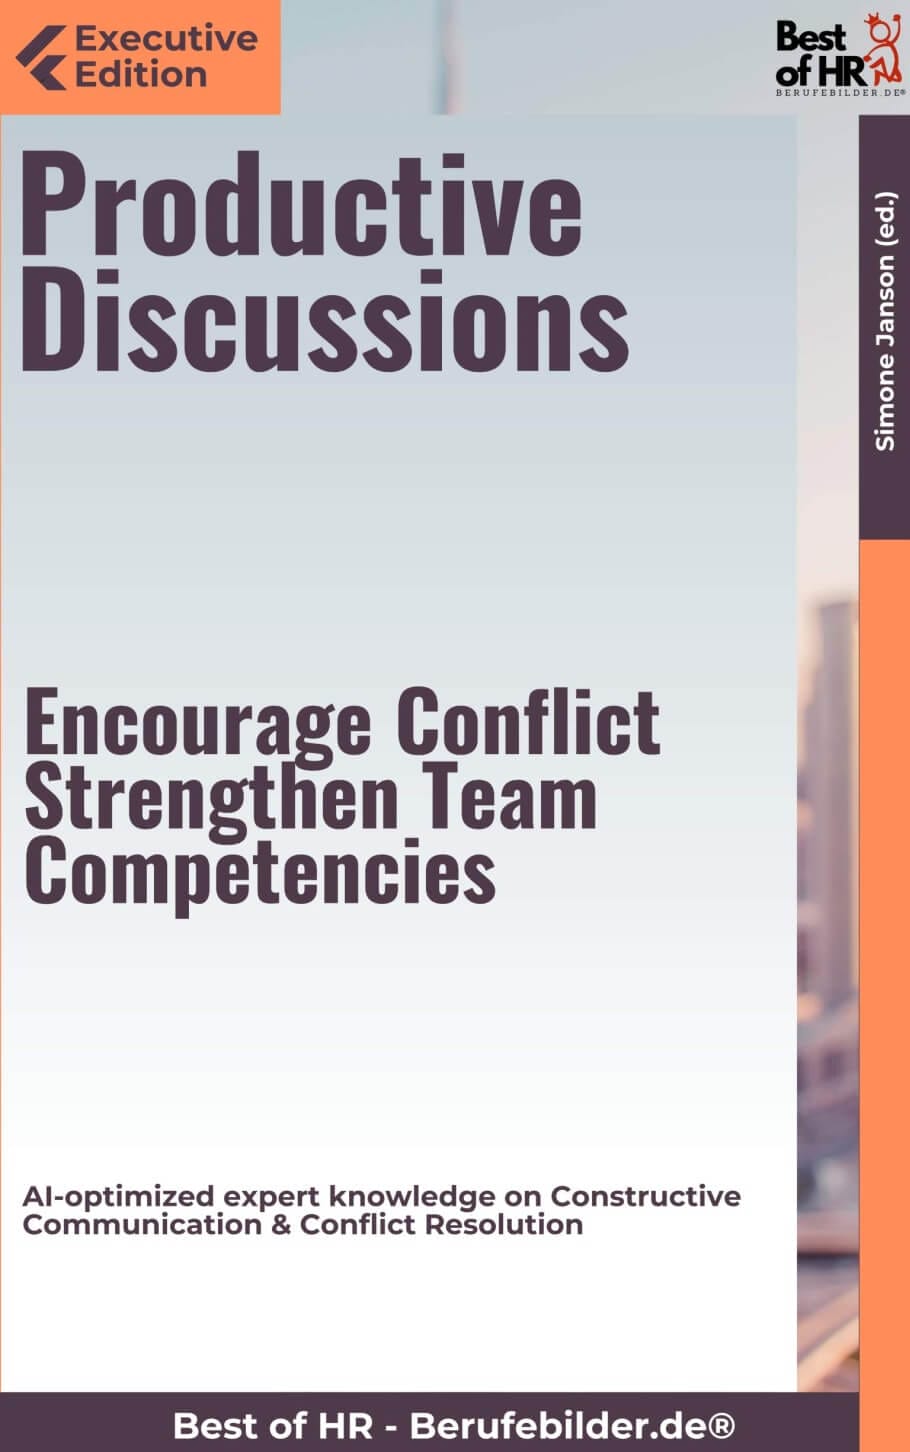 Productive Discussions – Encourage Conflict, Strengthen Team Competencies (Engl. Version) [Digital]